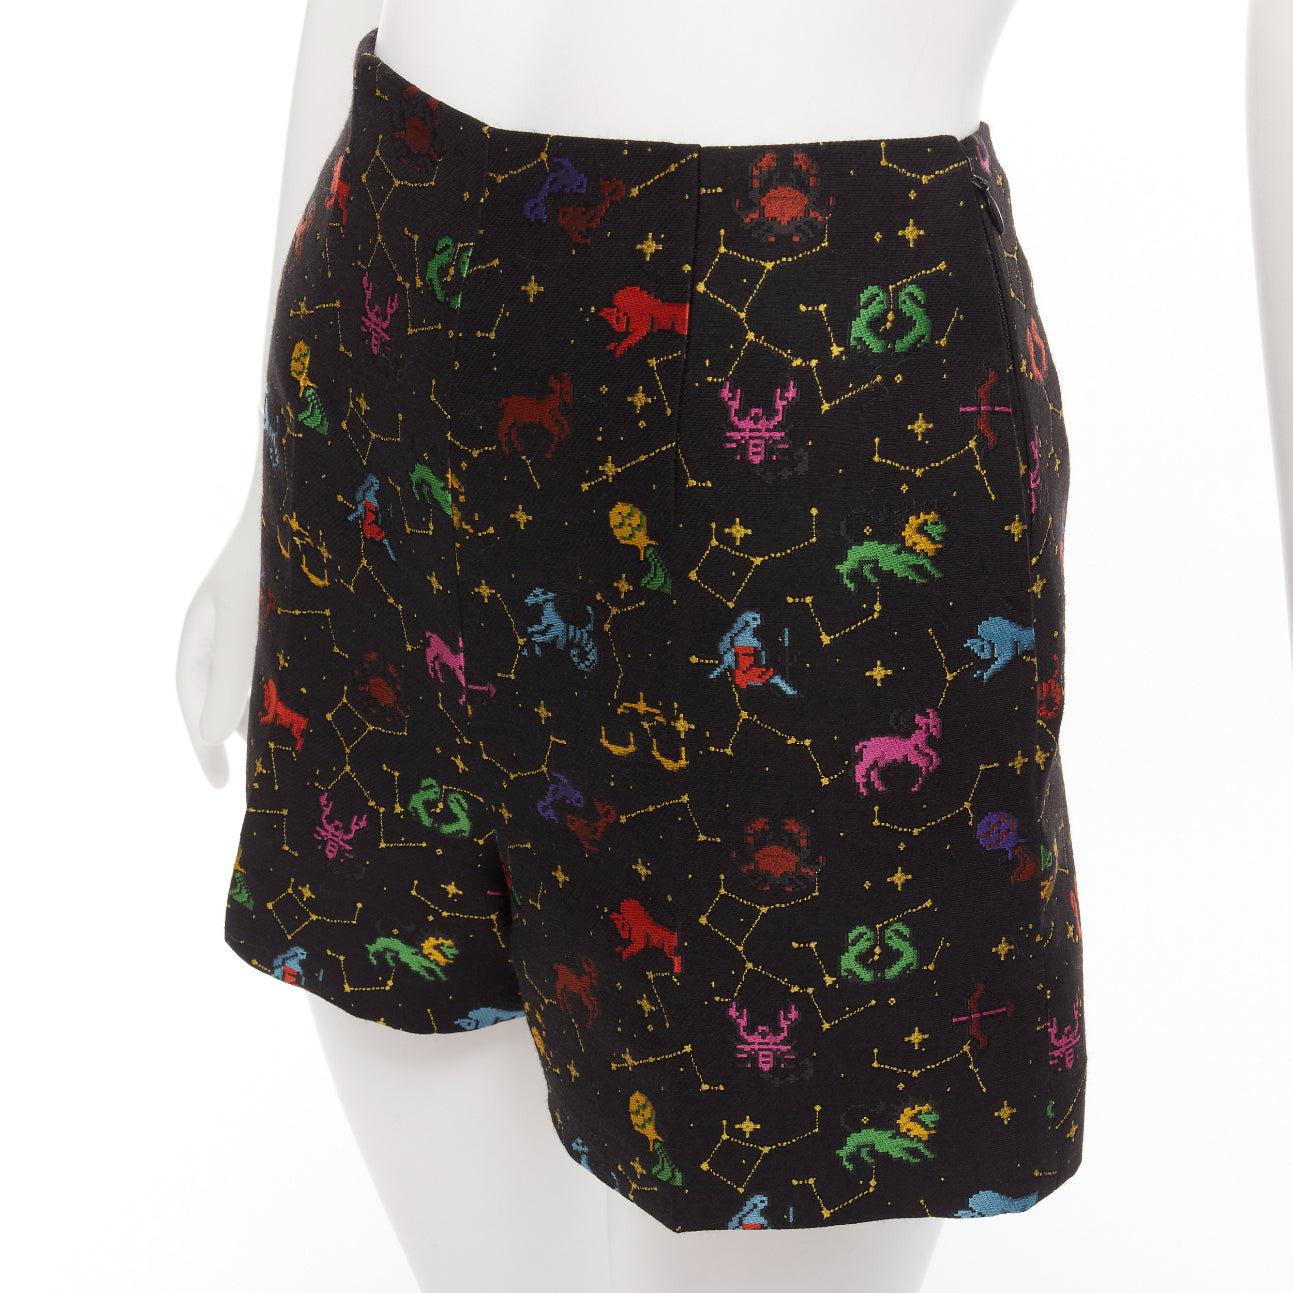 DIOR Lucky Dior black colorful astrology jacquard high waisted shorts FR32 XXS
Reference: AAWC/A00874
Brand: Dior
Designer: Maria Grazia Chiuri
Collection: Lucky Dior
Material: Polyester, Blend
Color: Black, Multicolour
Pattern: Abstract
Closure: